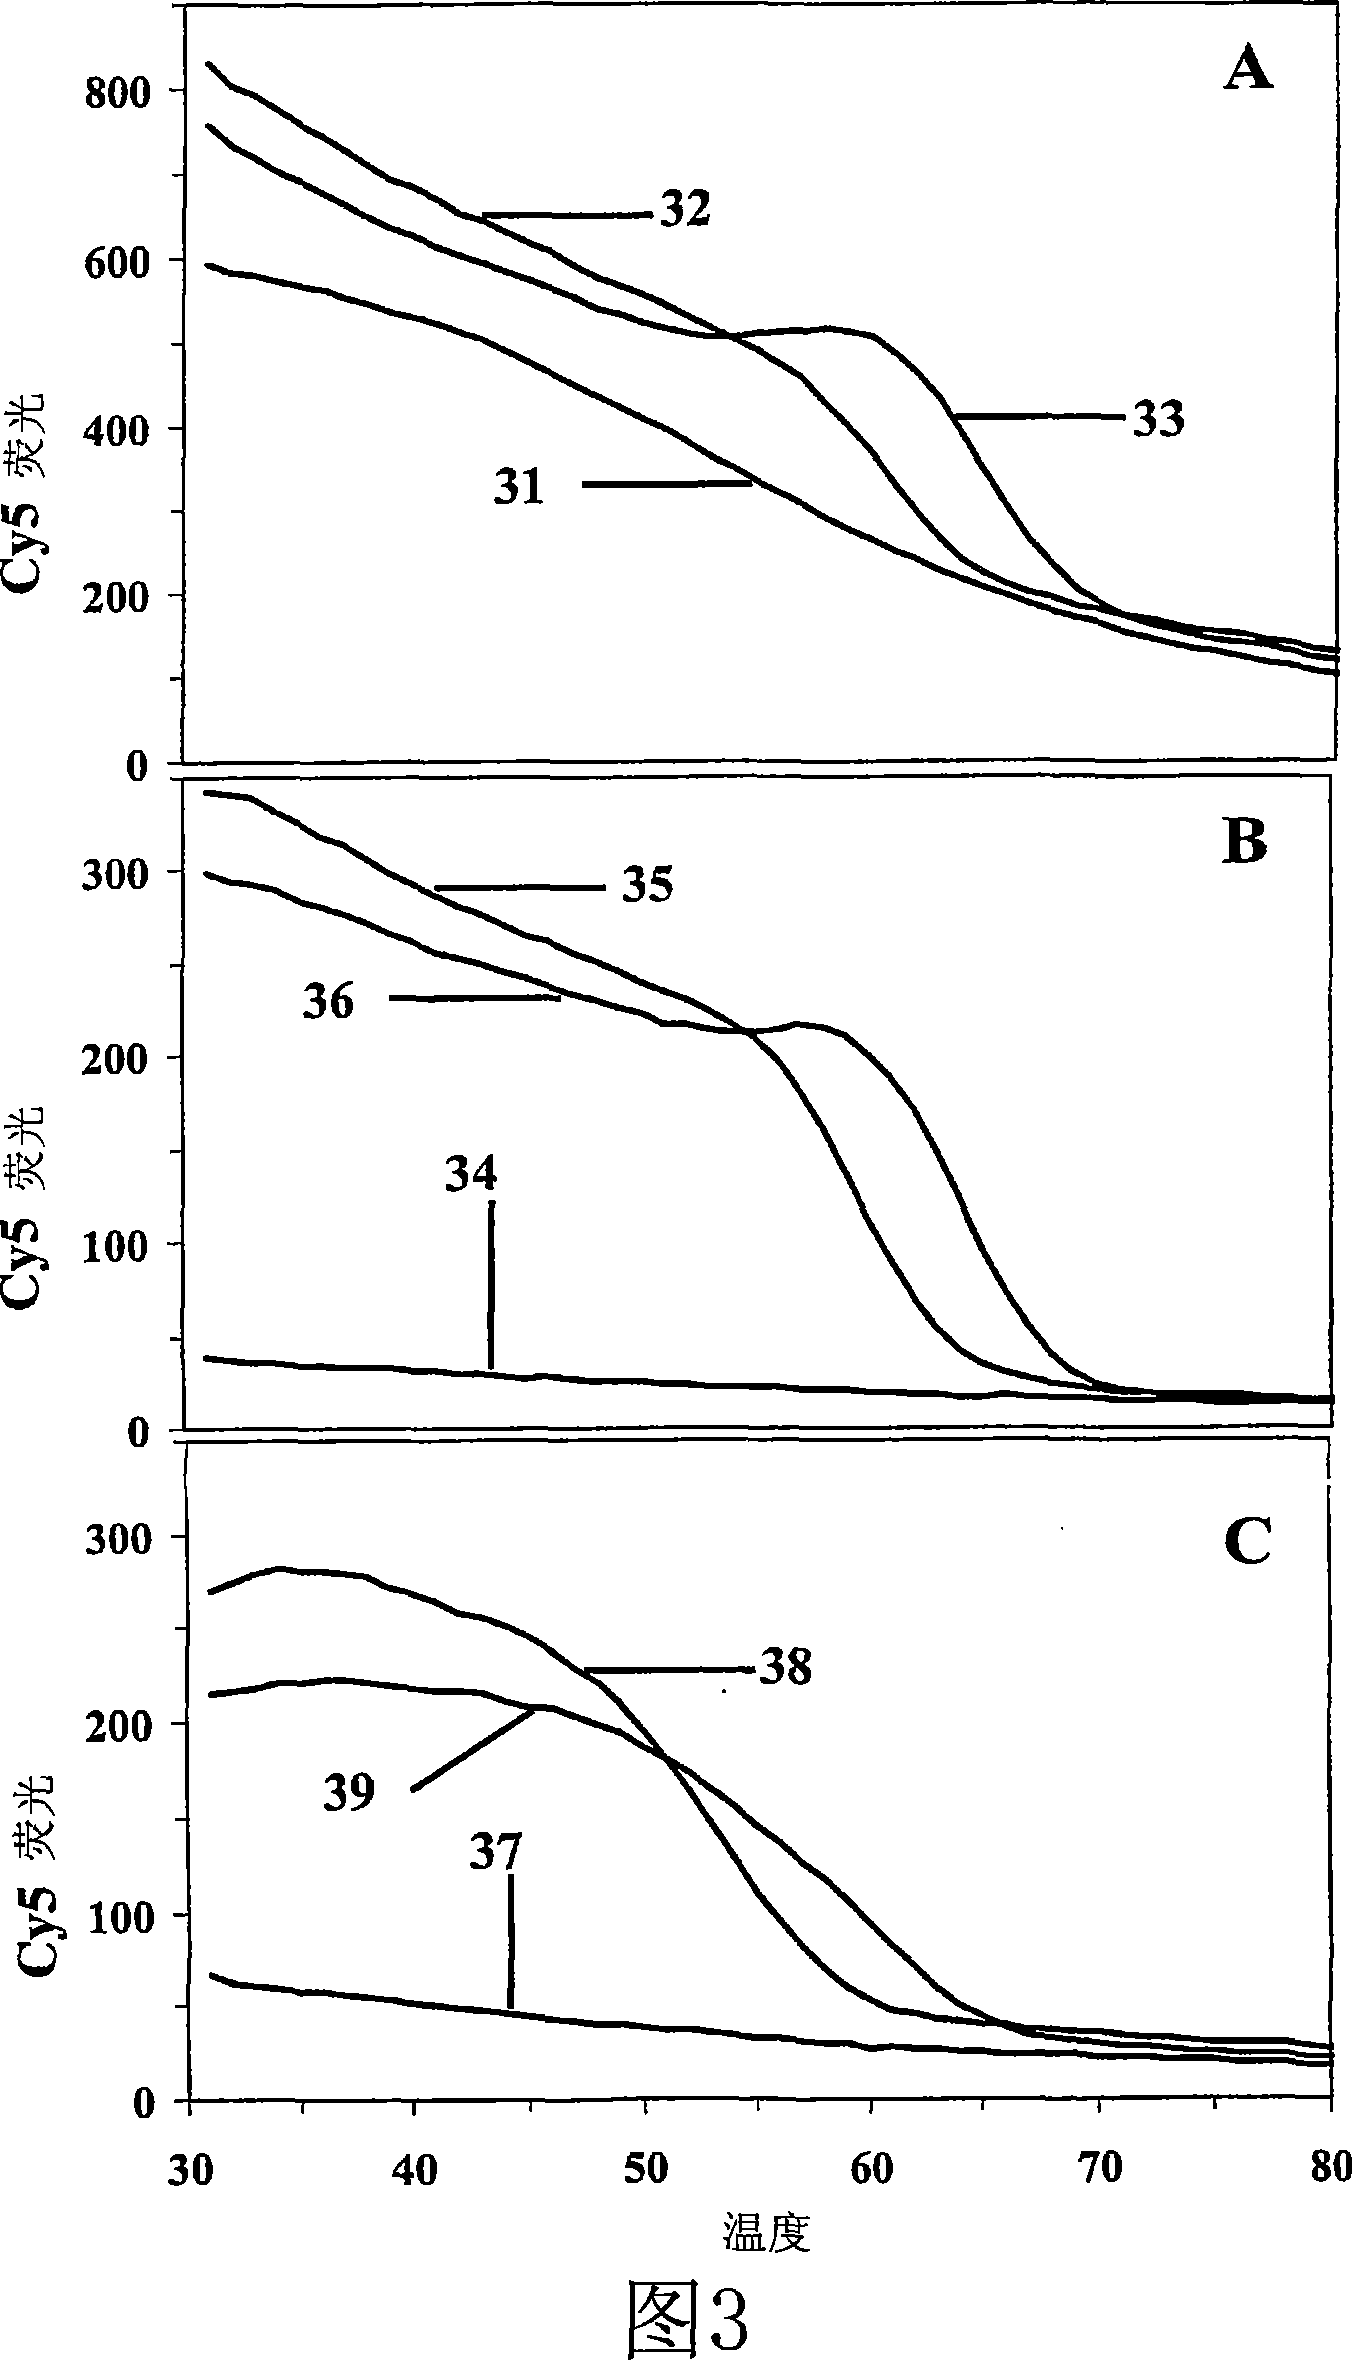 Primers, probes and methods for nucleic acid amplification